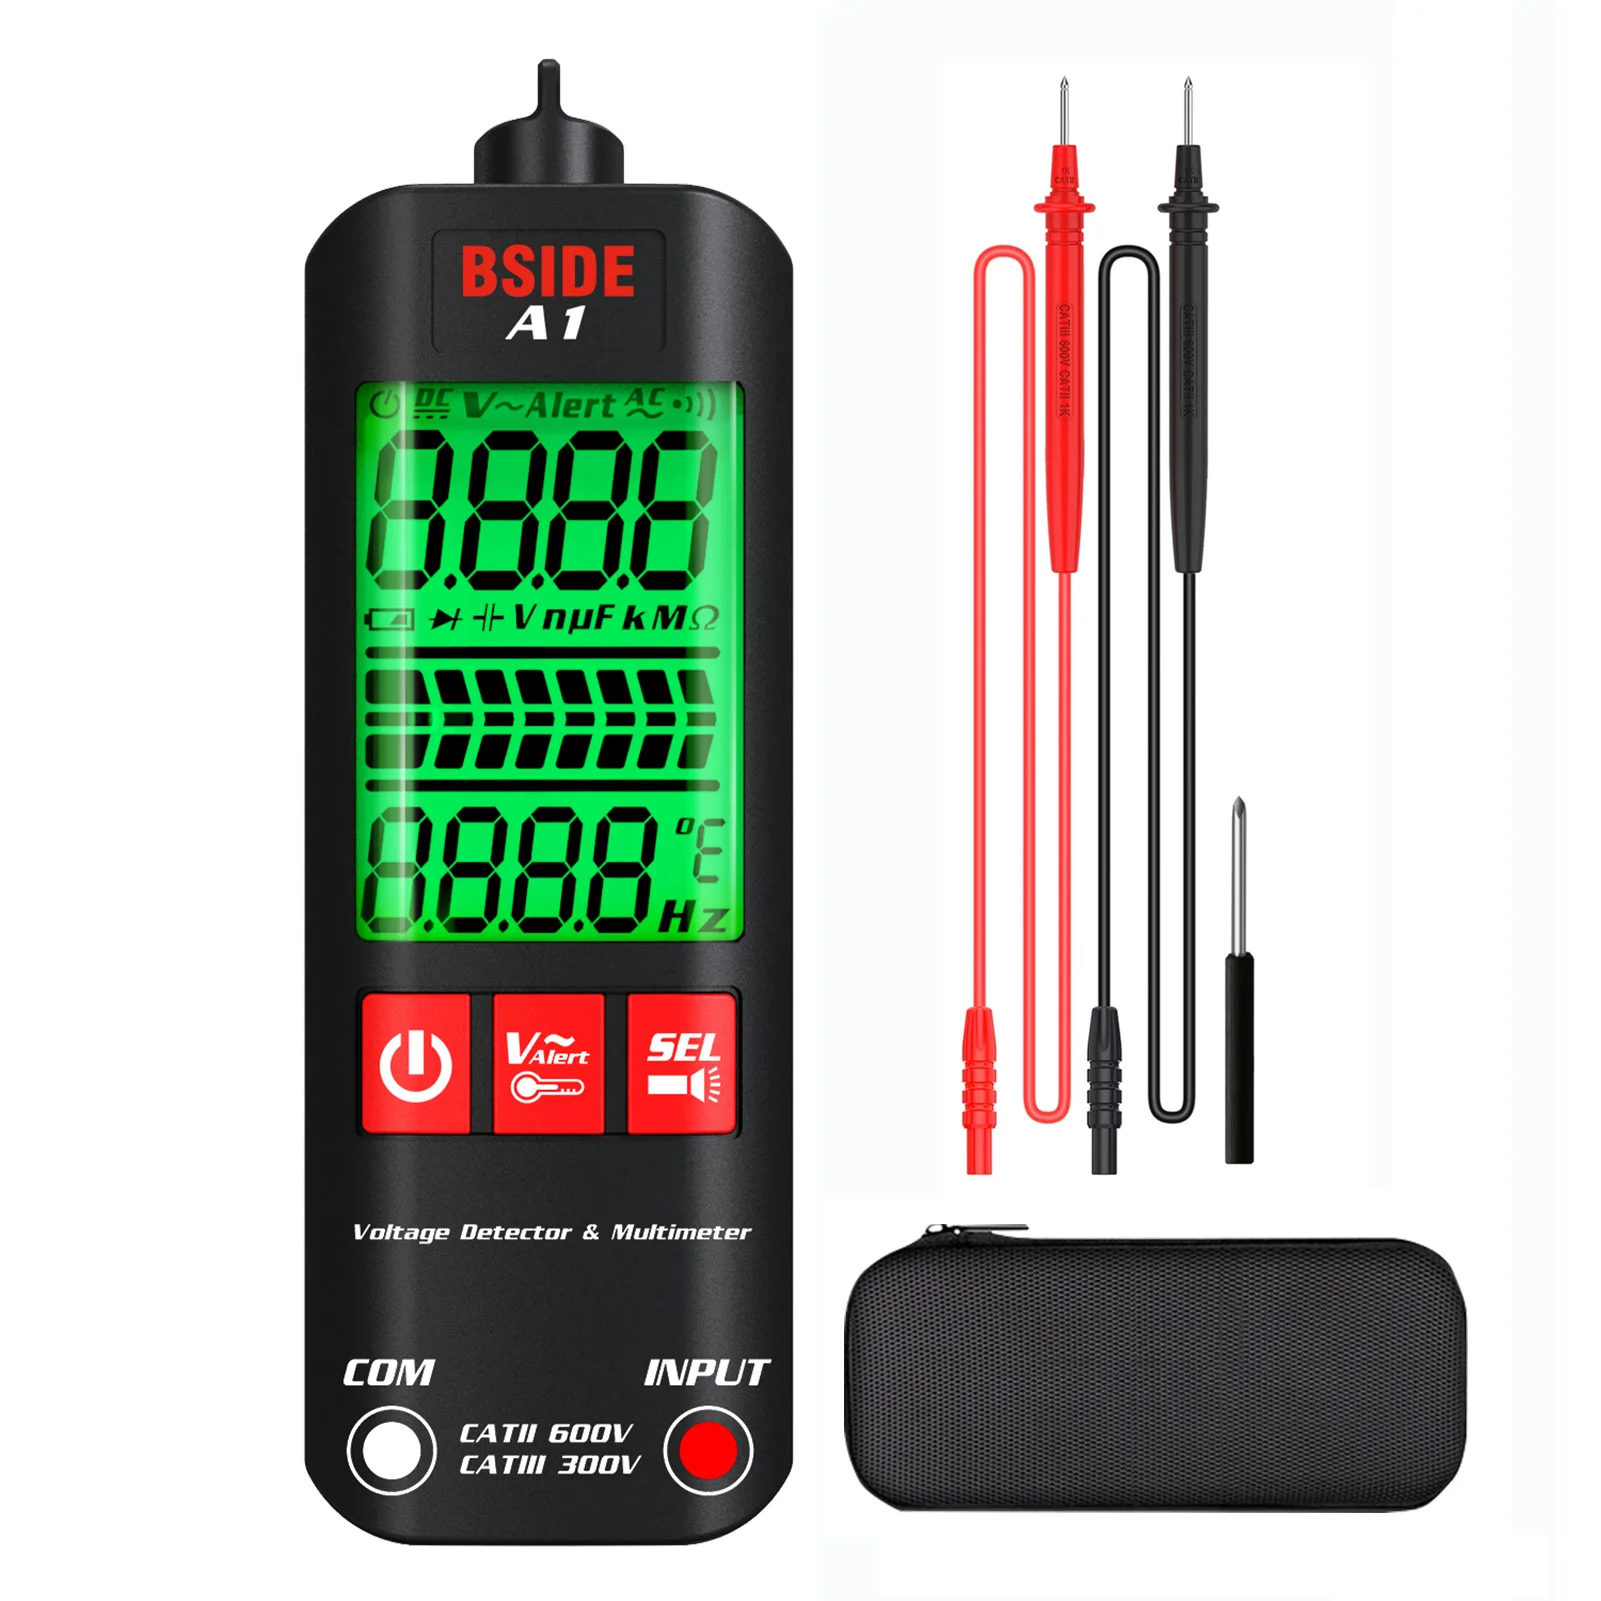 

A1 Mini Multimeter LCD Digital Tester Voltage Detector 2000 Counts DC/AC Voltage Frequency Resistance NCV True RMS Meter